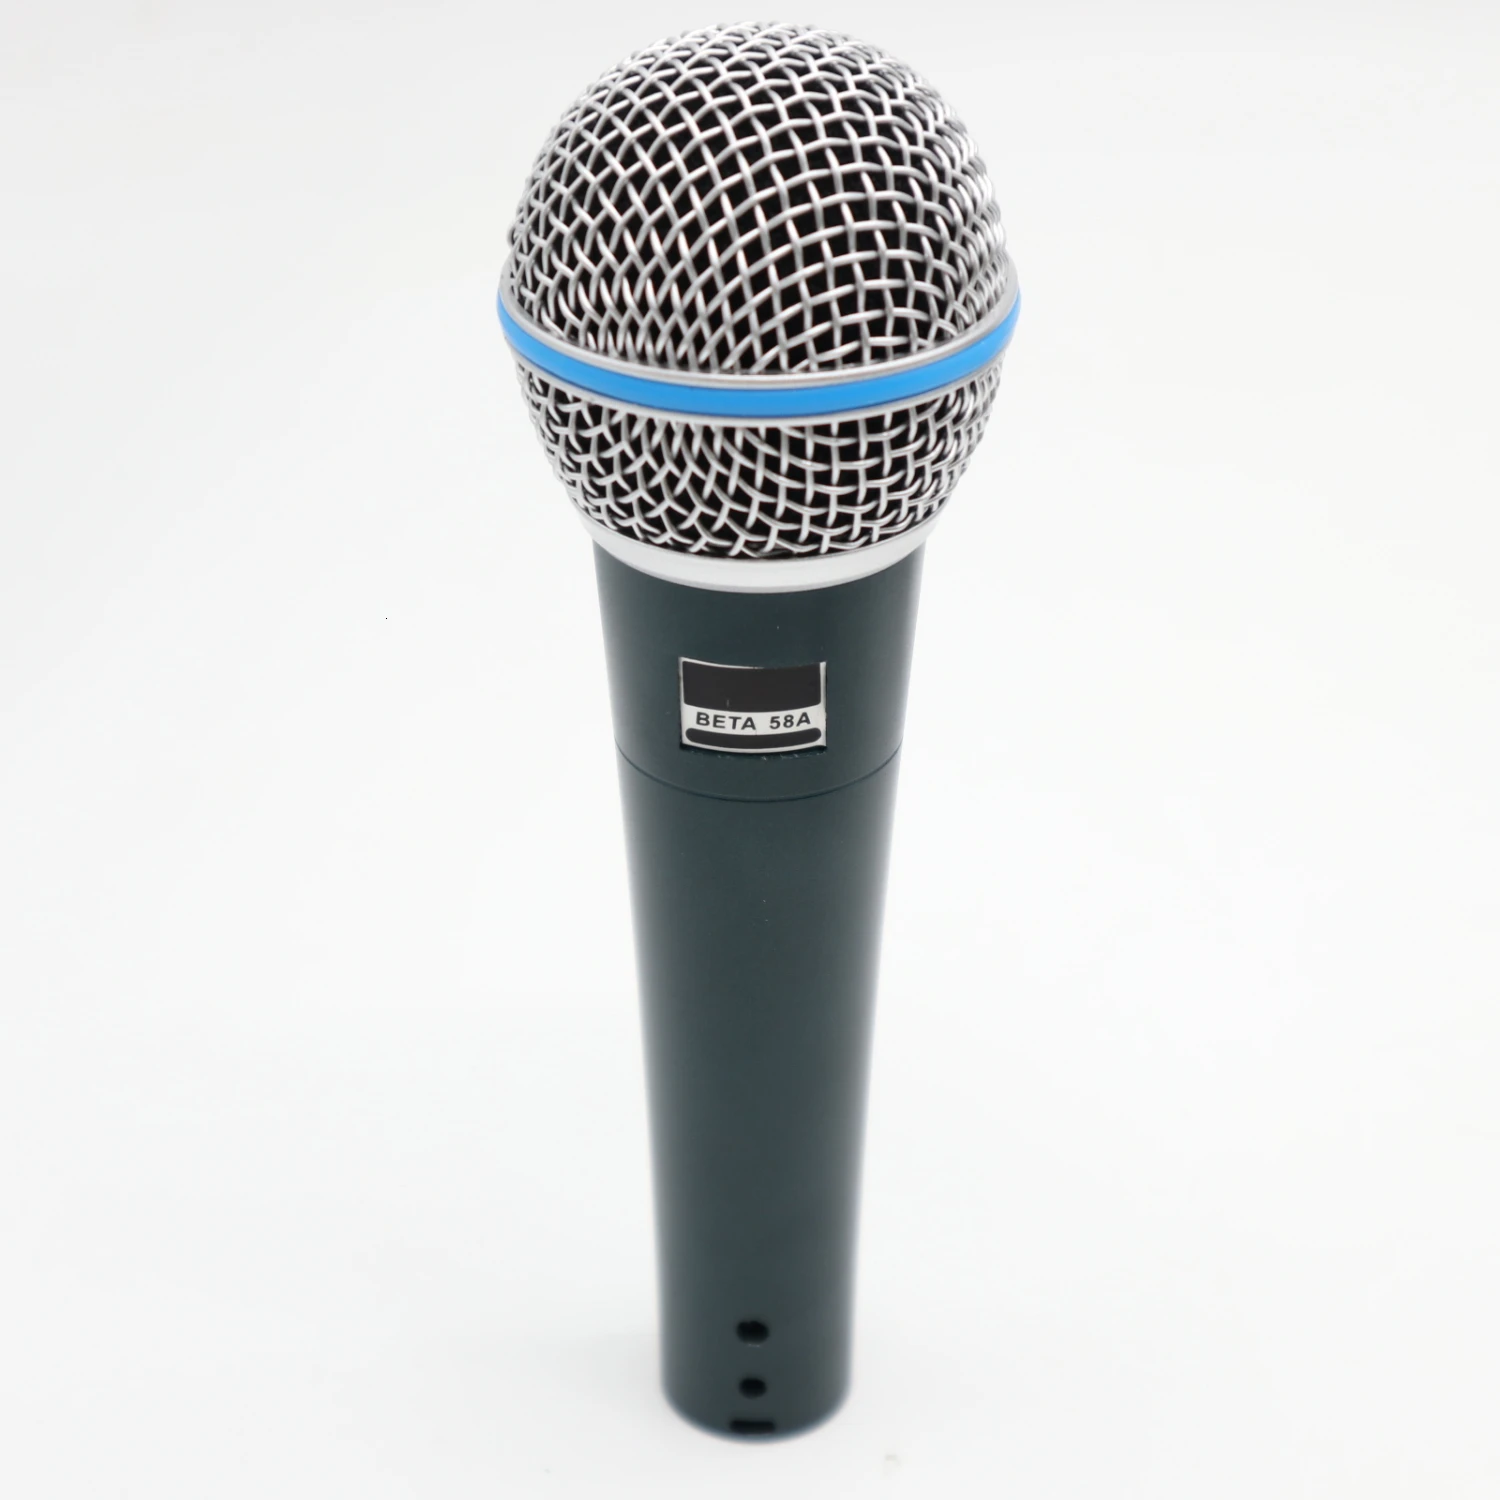 

BETA58A Professional Handheld Switch Vocal Dynamic Microphone Mike For BETA 58A 58 Studio Singing Home Party KTV Speech Karaoke